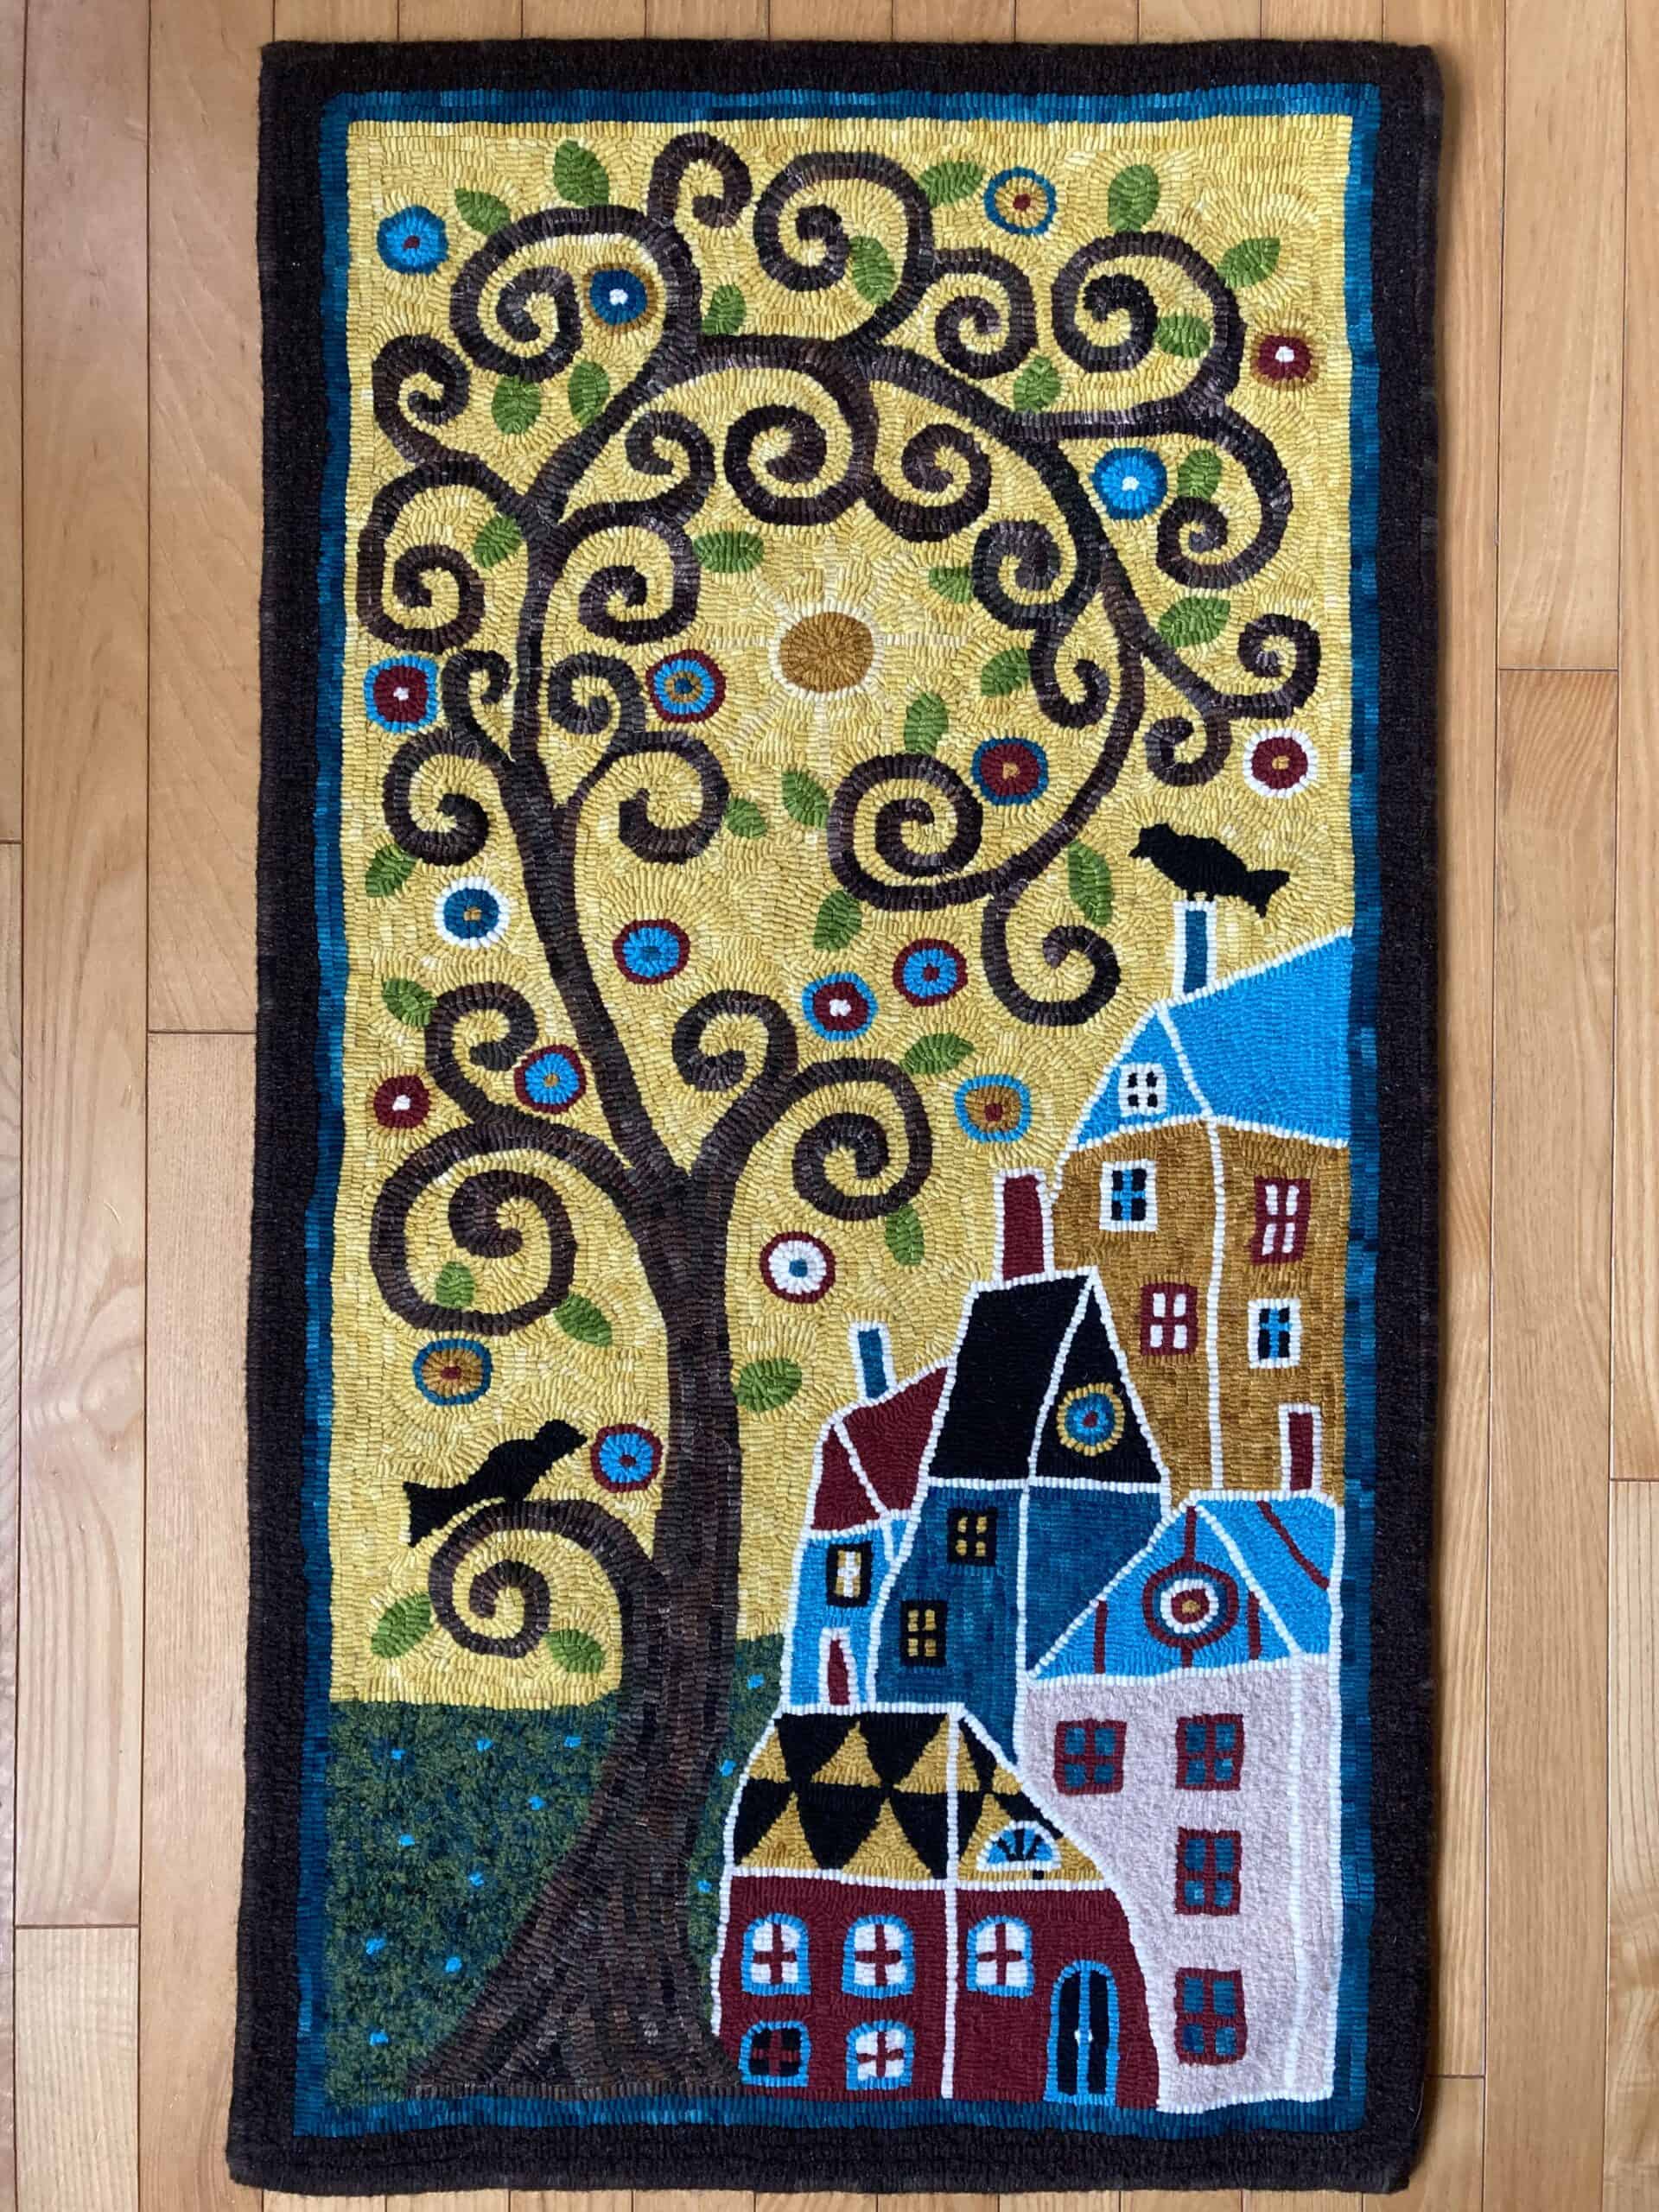 A Karla Gerard design, hooked and photographed by <strong>Deborah Settle</strong>, Chance Harbour NS, completed in 2019, 19" x 32"